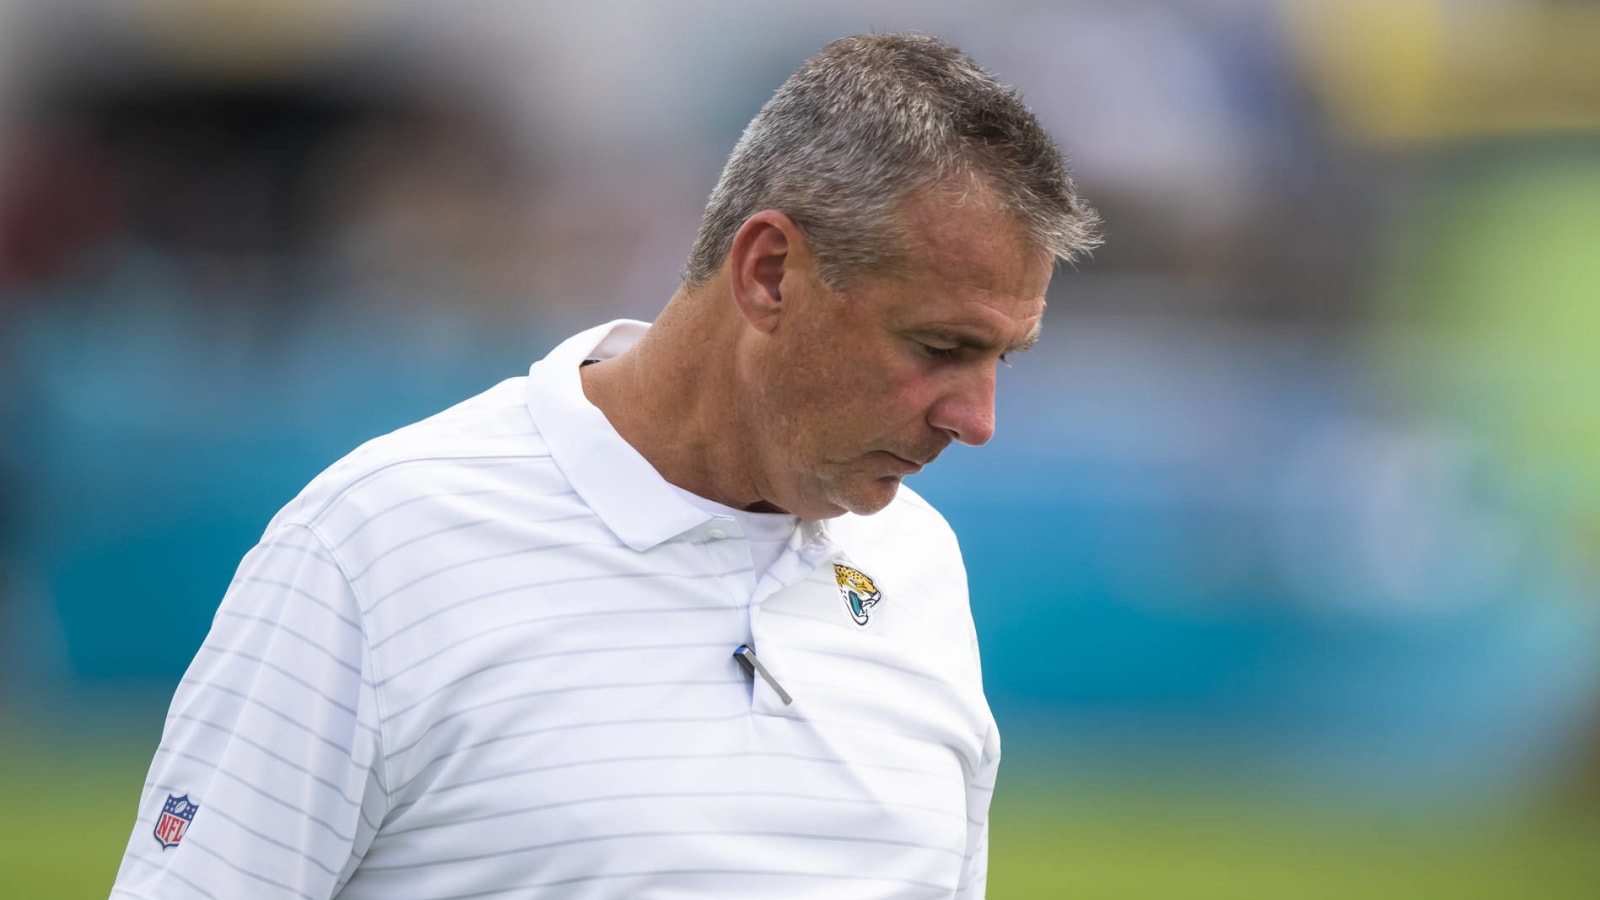 Urban Meyer apologized to Jaguars players in team meeting